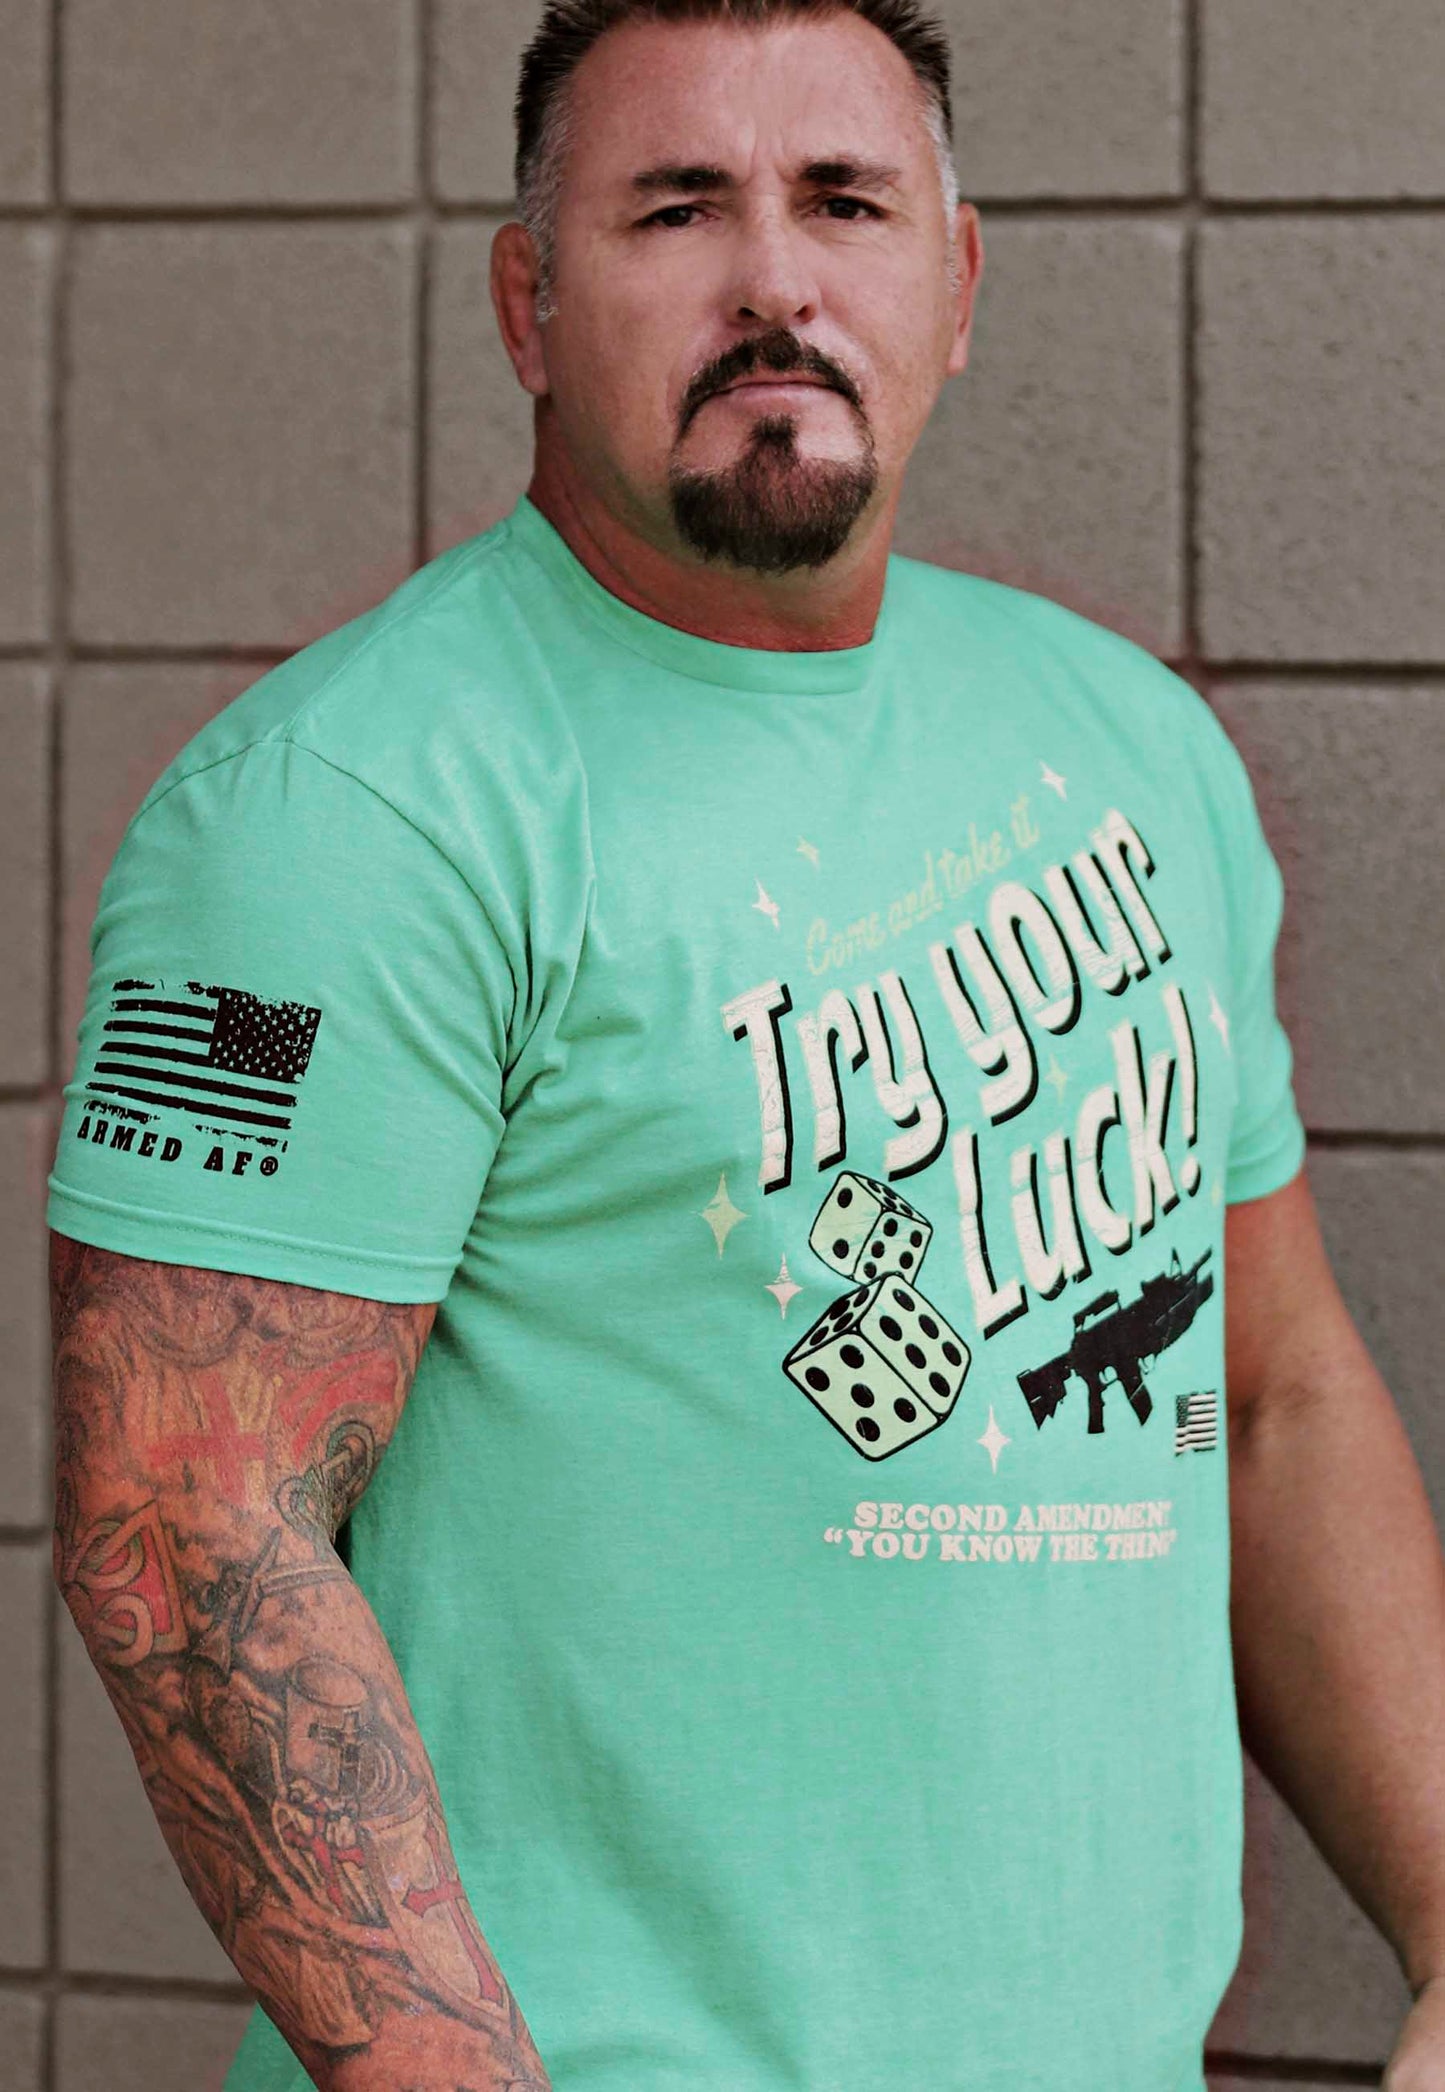 MMA Champion Shannon Ritch in Armed AF t-shirt